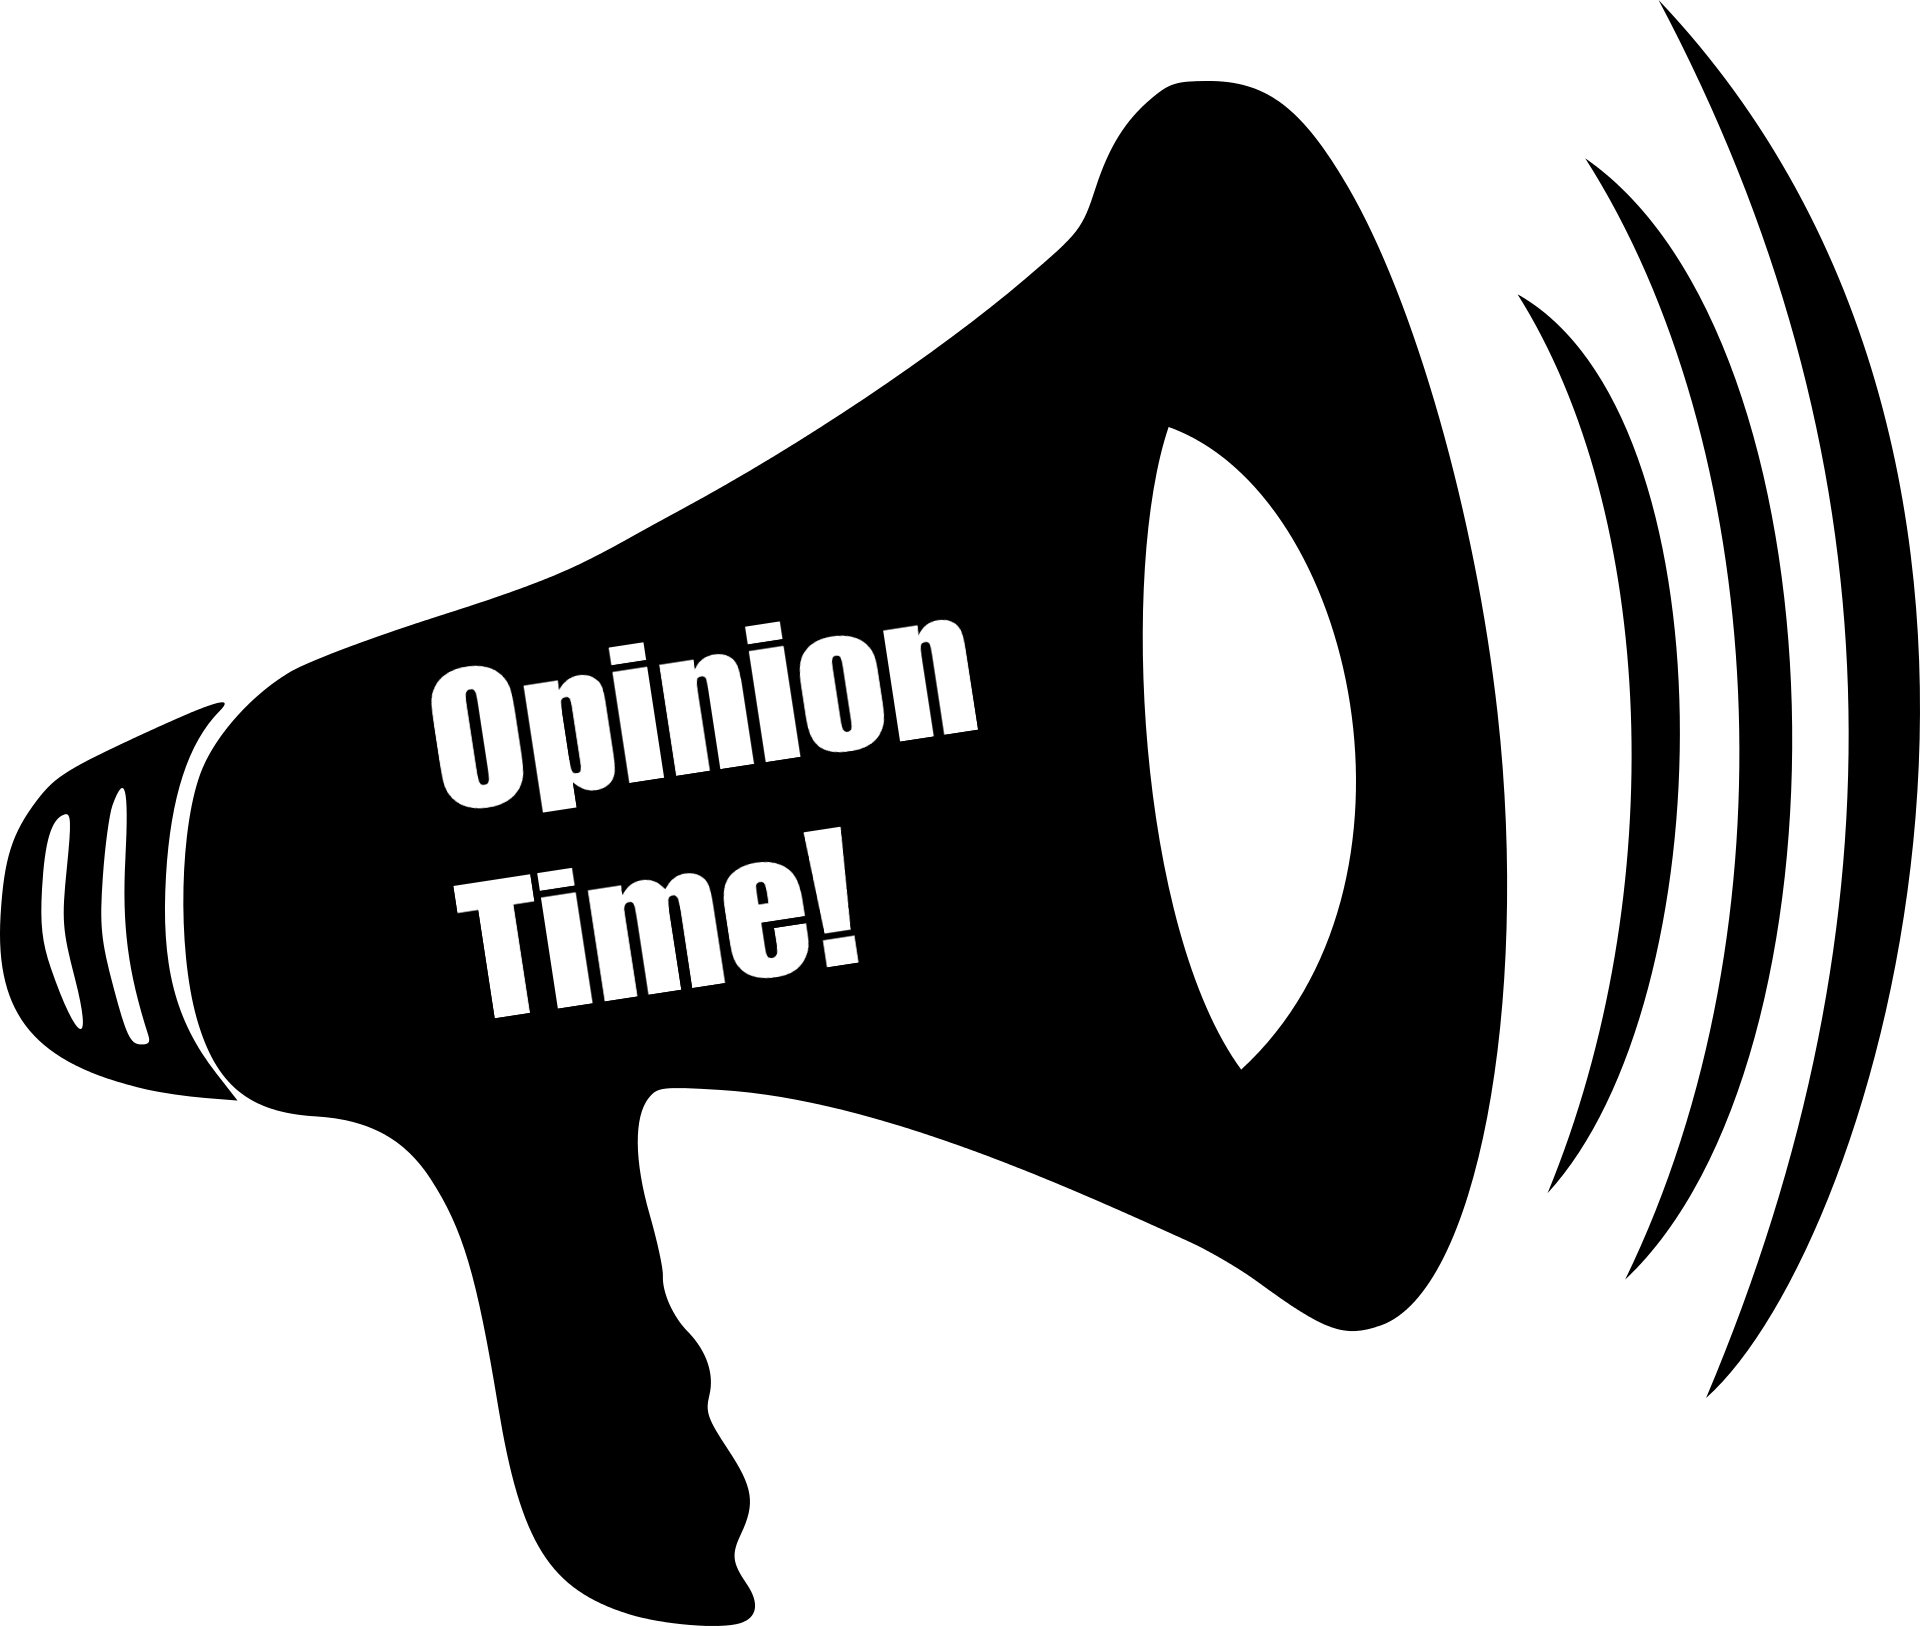 The Opinion Time! Megaphone